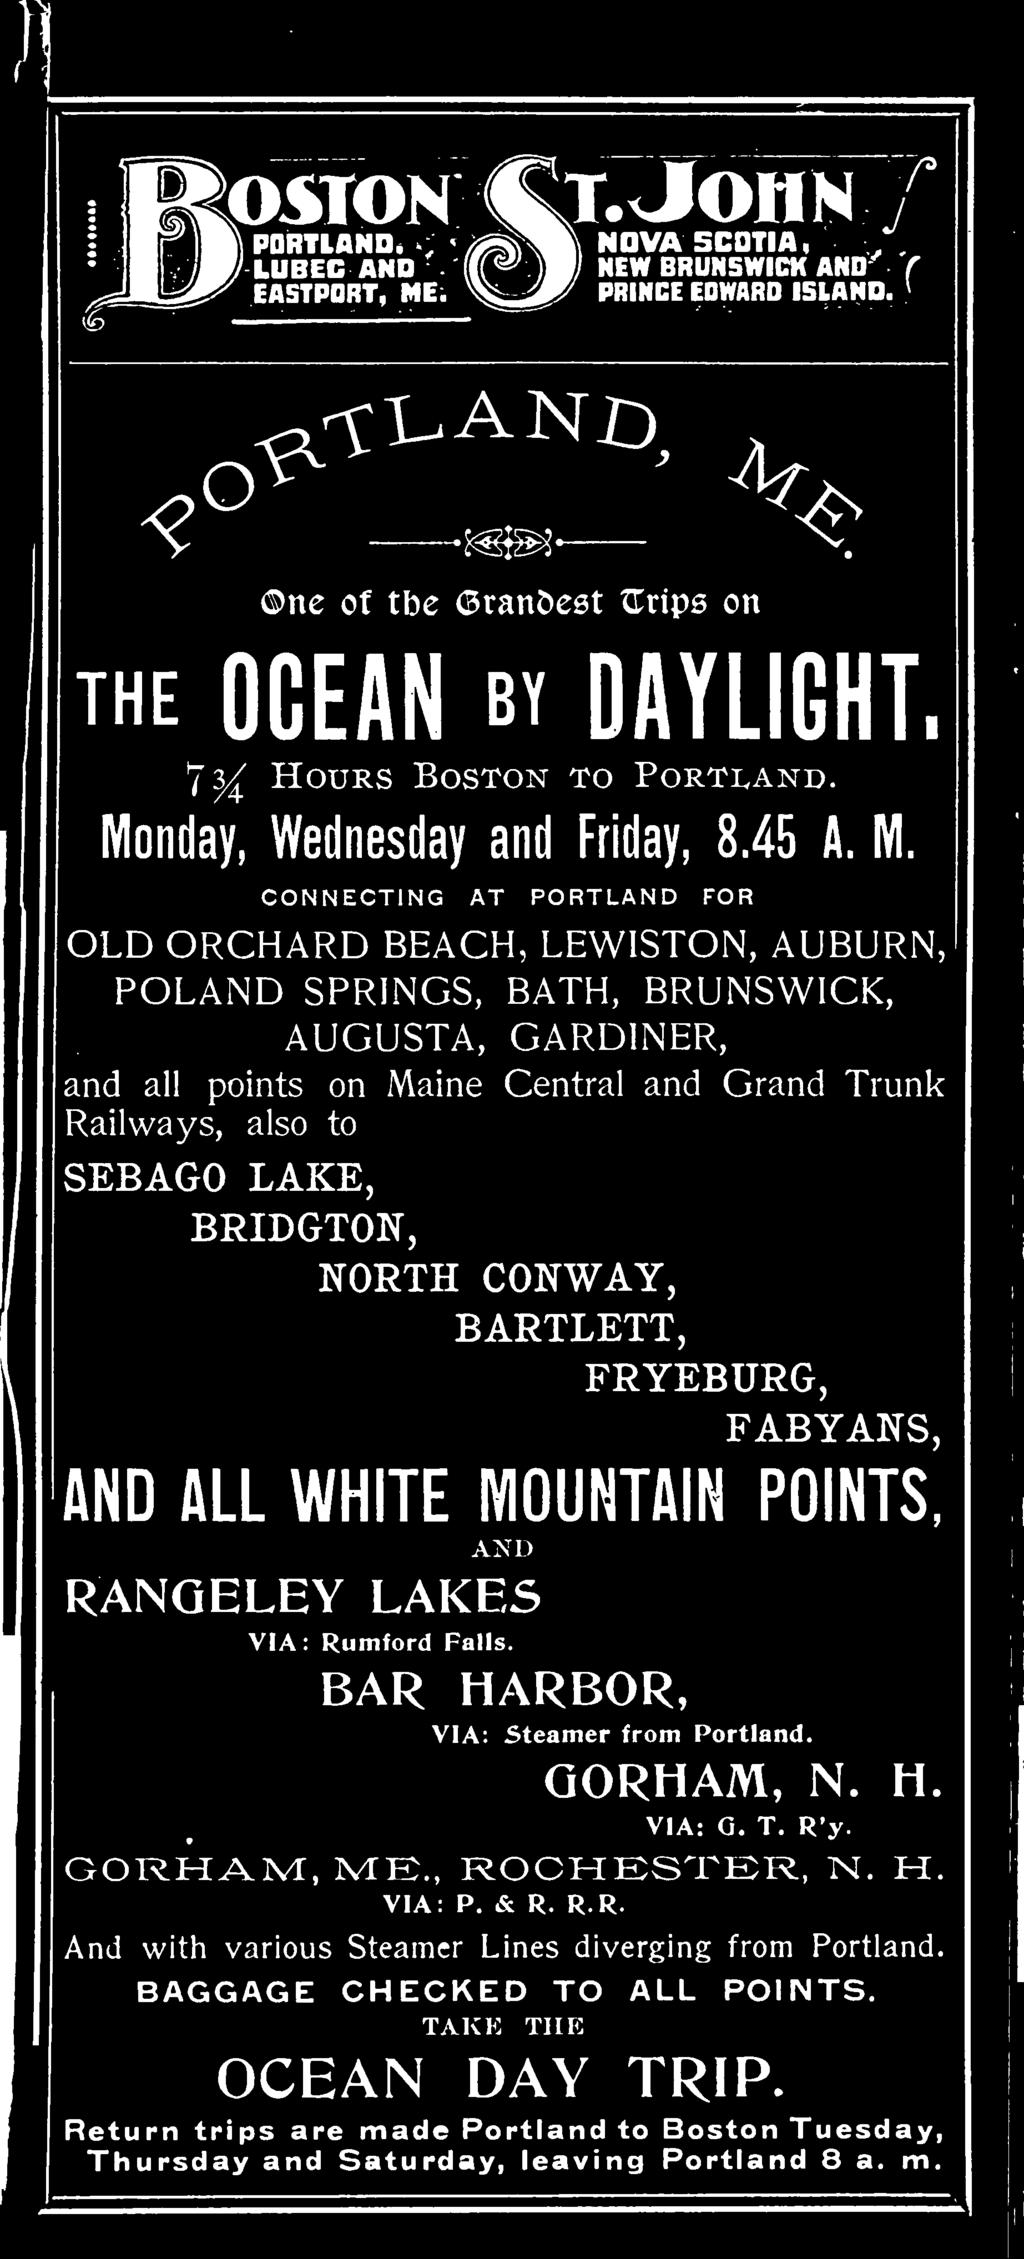 and Grand Trunk Railways, also to SEBAGO LAKE, BRIDGTON, NORTH CONWAY, BARTLETT, FRYEBURG, FABYANS, AND ALL WHITE MOUNTAIN POINTS, AND RANGELEY